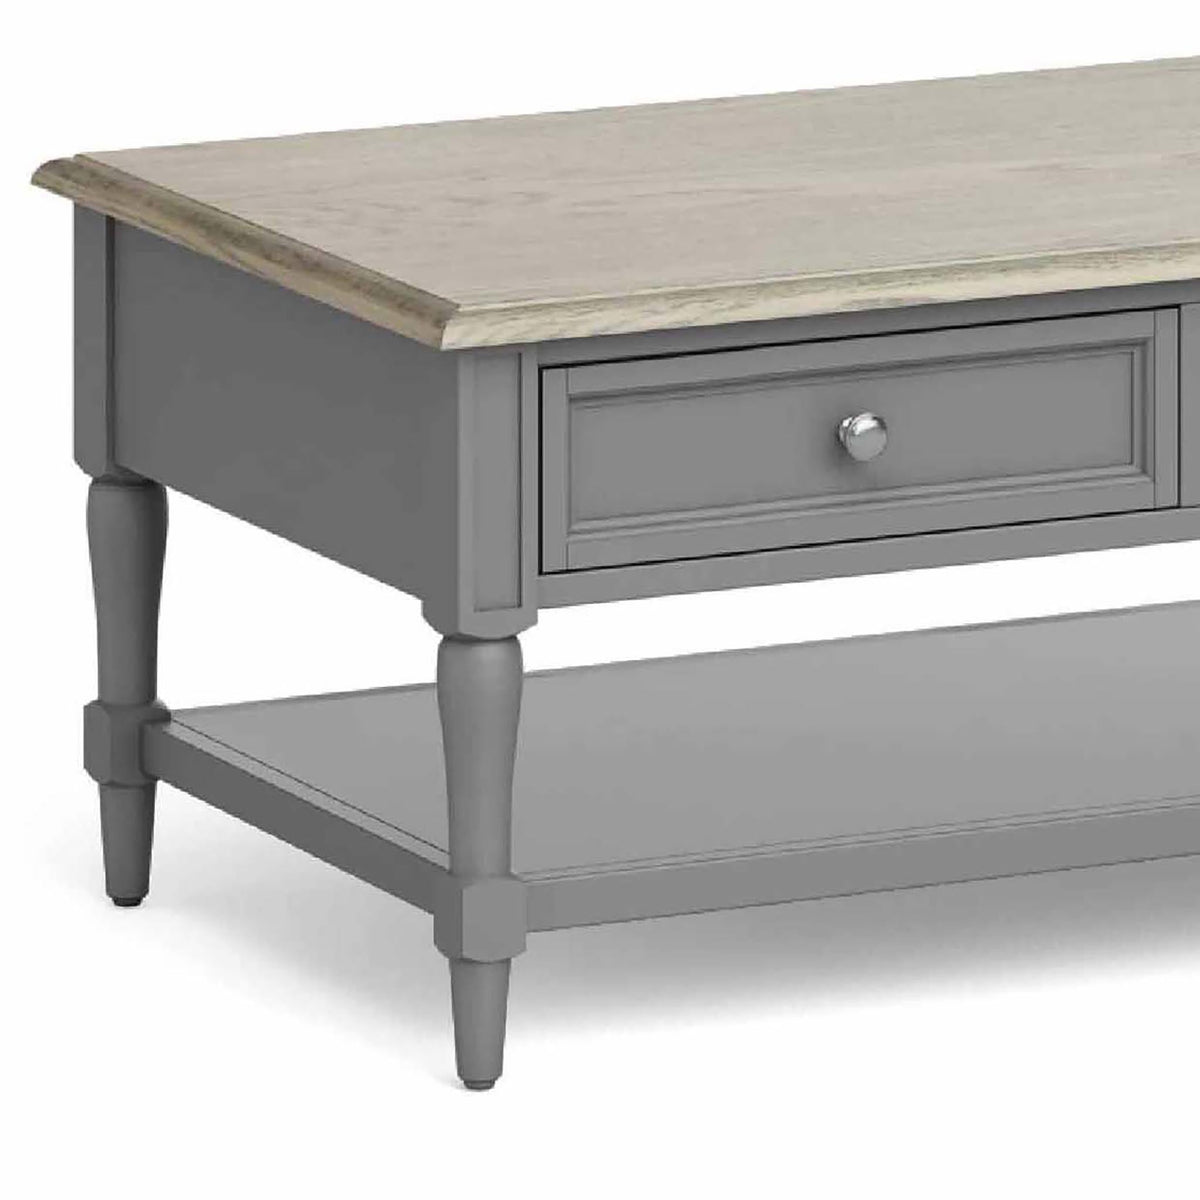 The Mulsanne Grey Coffee Table - Close Up of Drawer